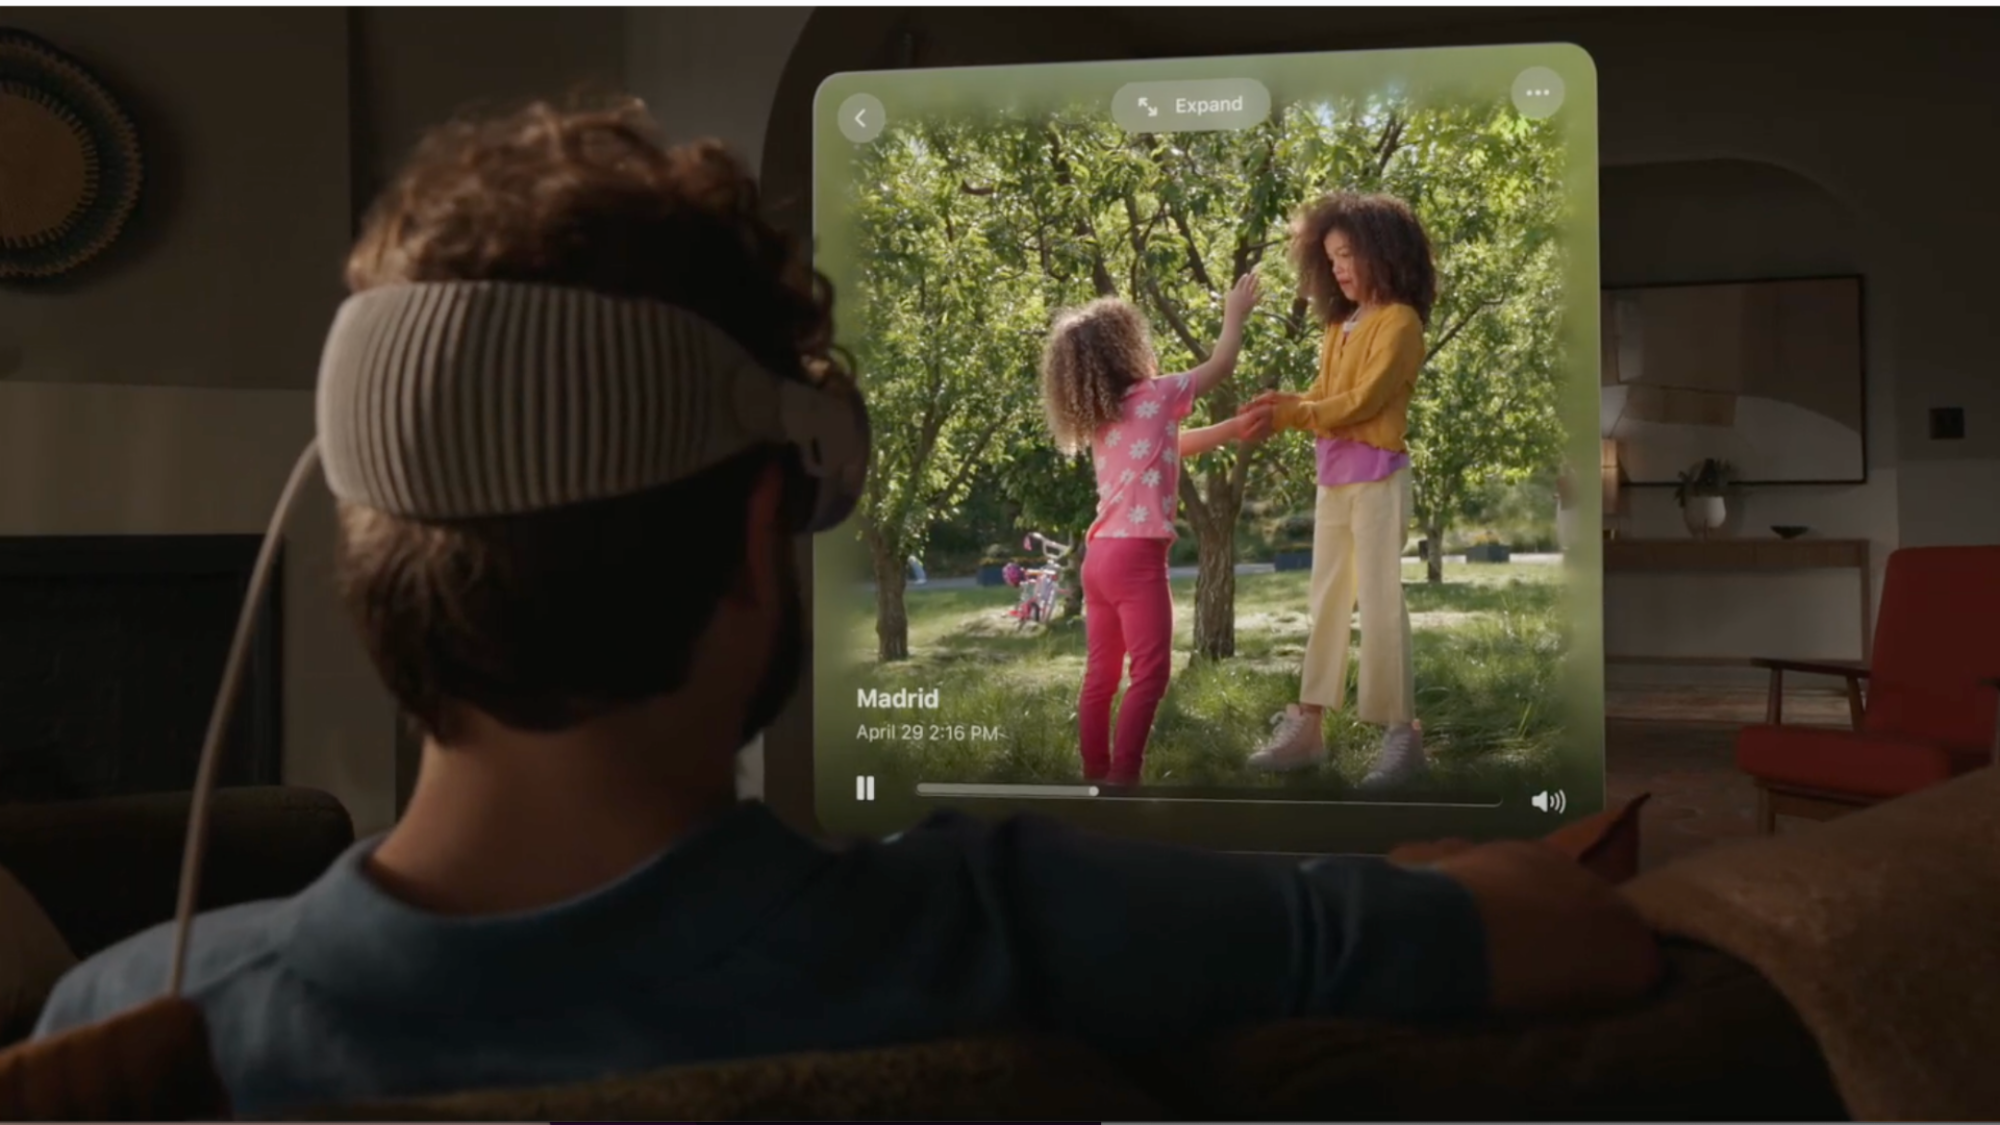 A white curly-haired man wearing the Apple Vision Pro is seen from the back. He is watching video of two girls (presumably his daughters) on a screen projected in front of him